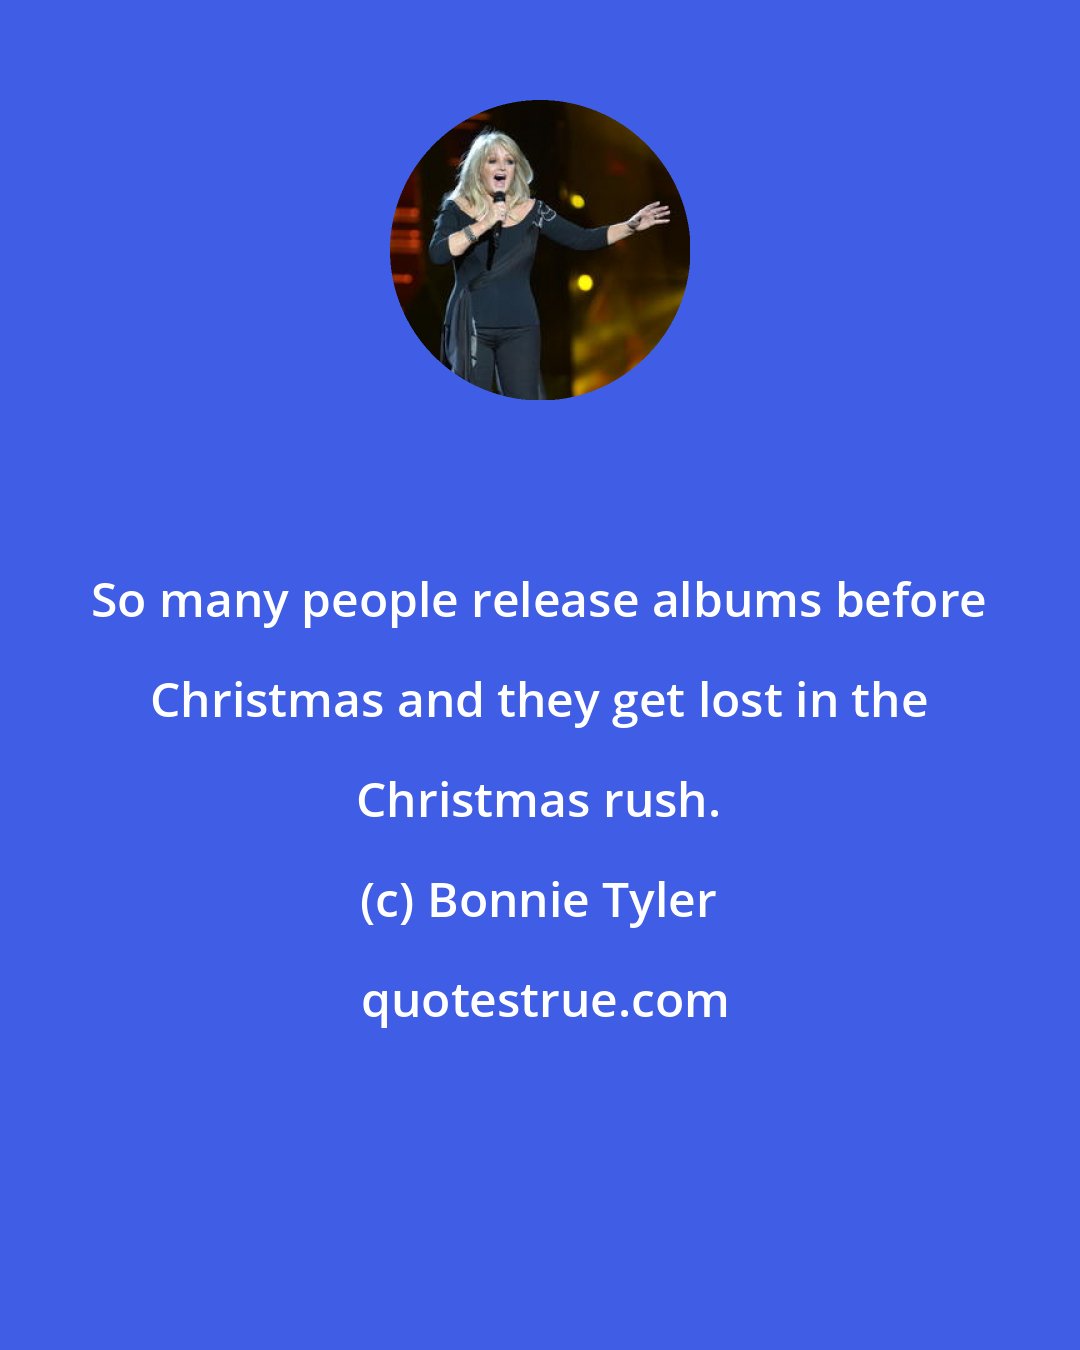 Bonnie Tyler: So many people release albums before Christmas and they get lost in the Christmas rush.